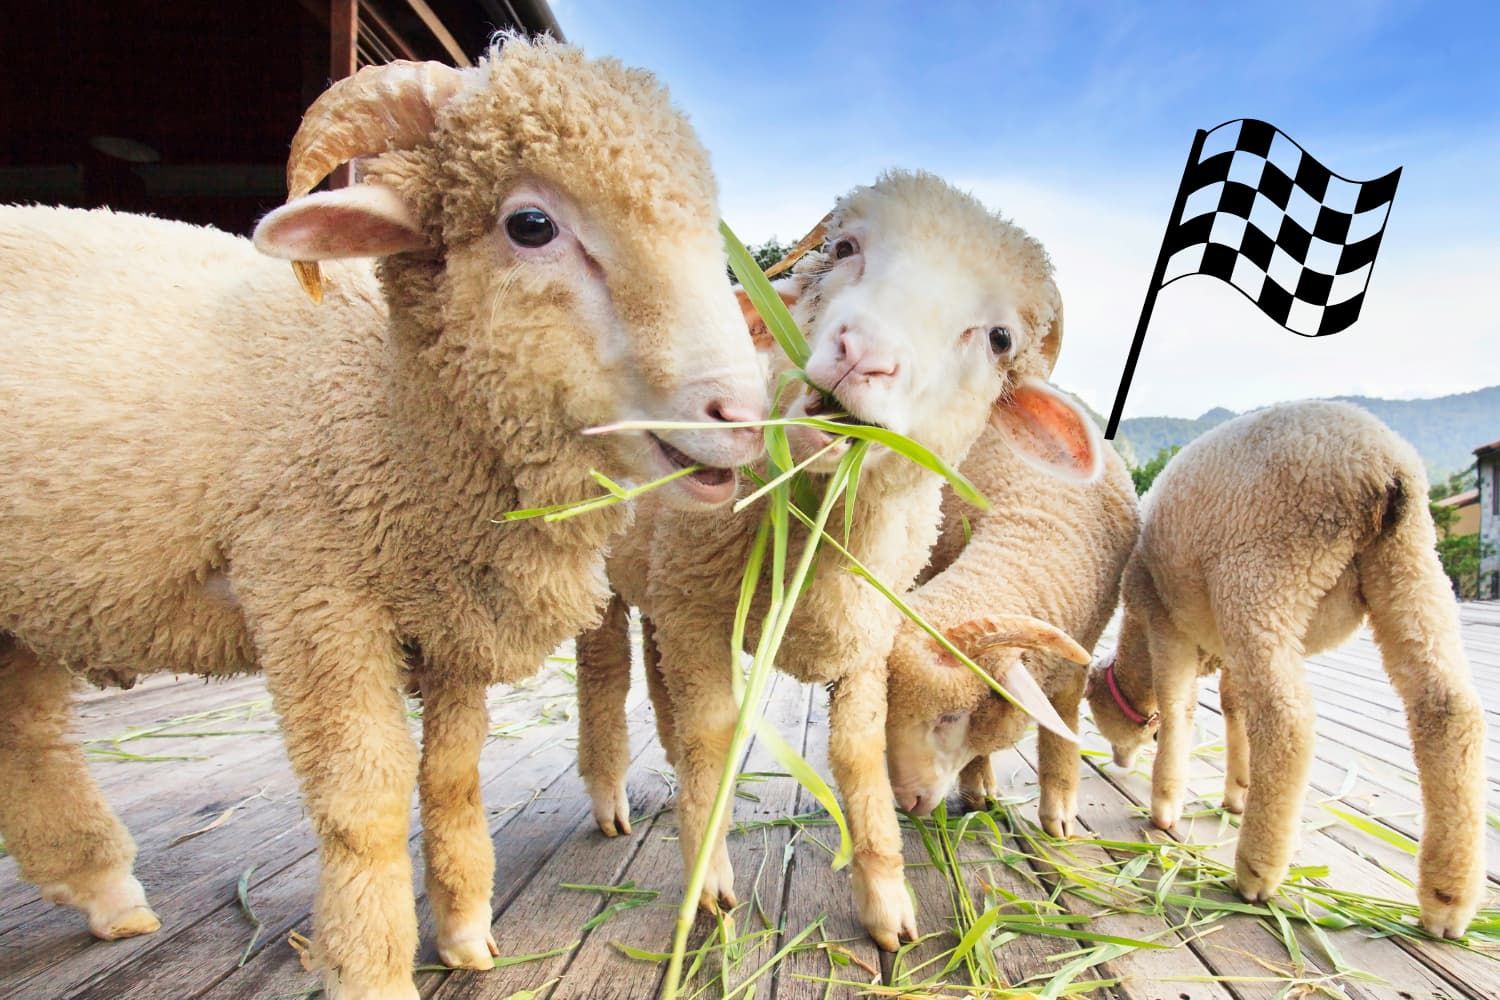 Game%20-%20OT%20Psalm%2023%20-%20The%20feed%20the%20sheep%20relay%20race-6bb58723 Water